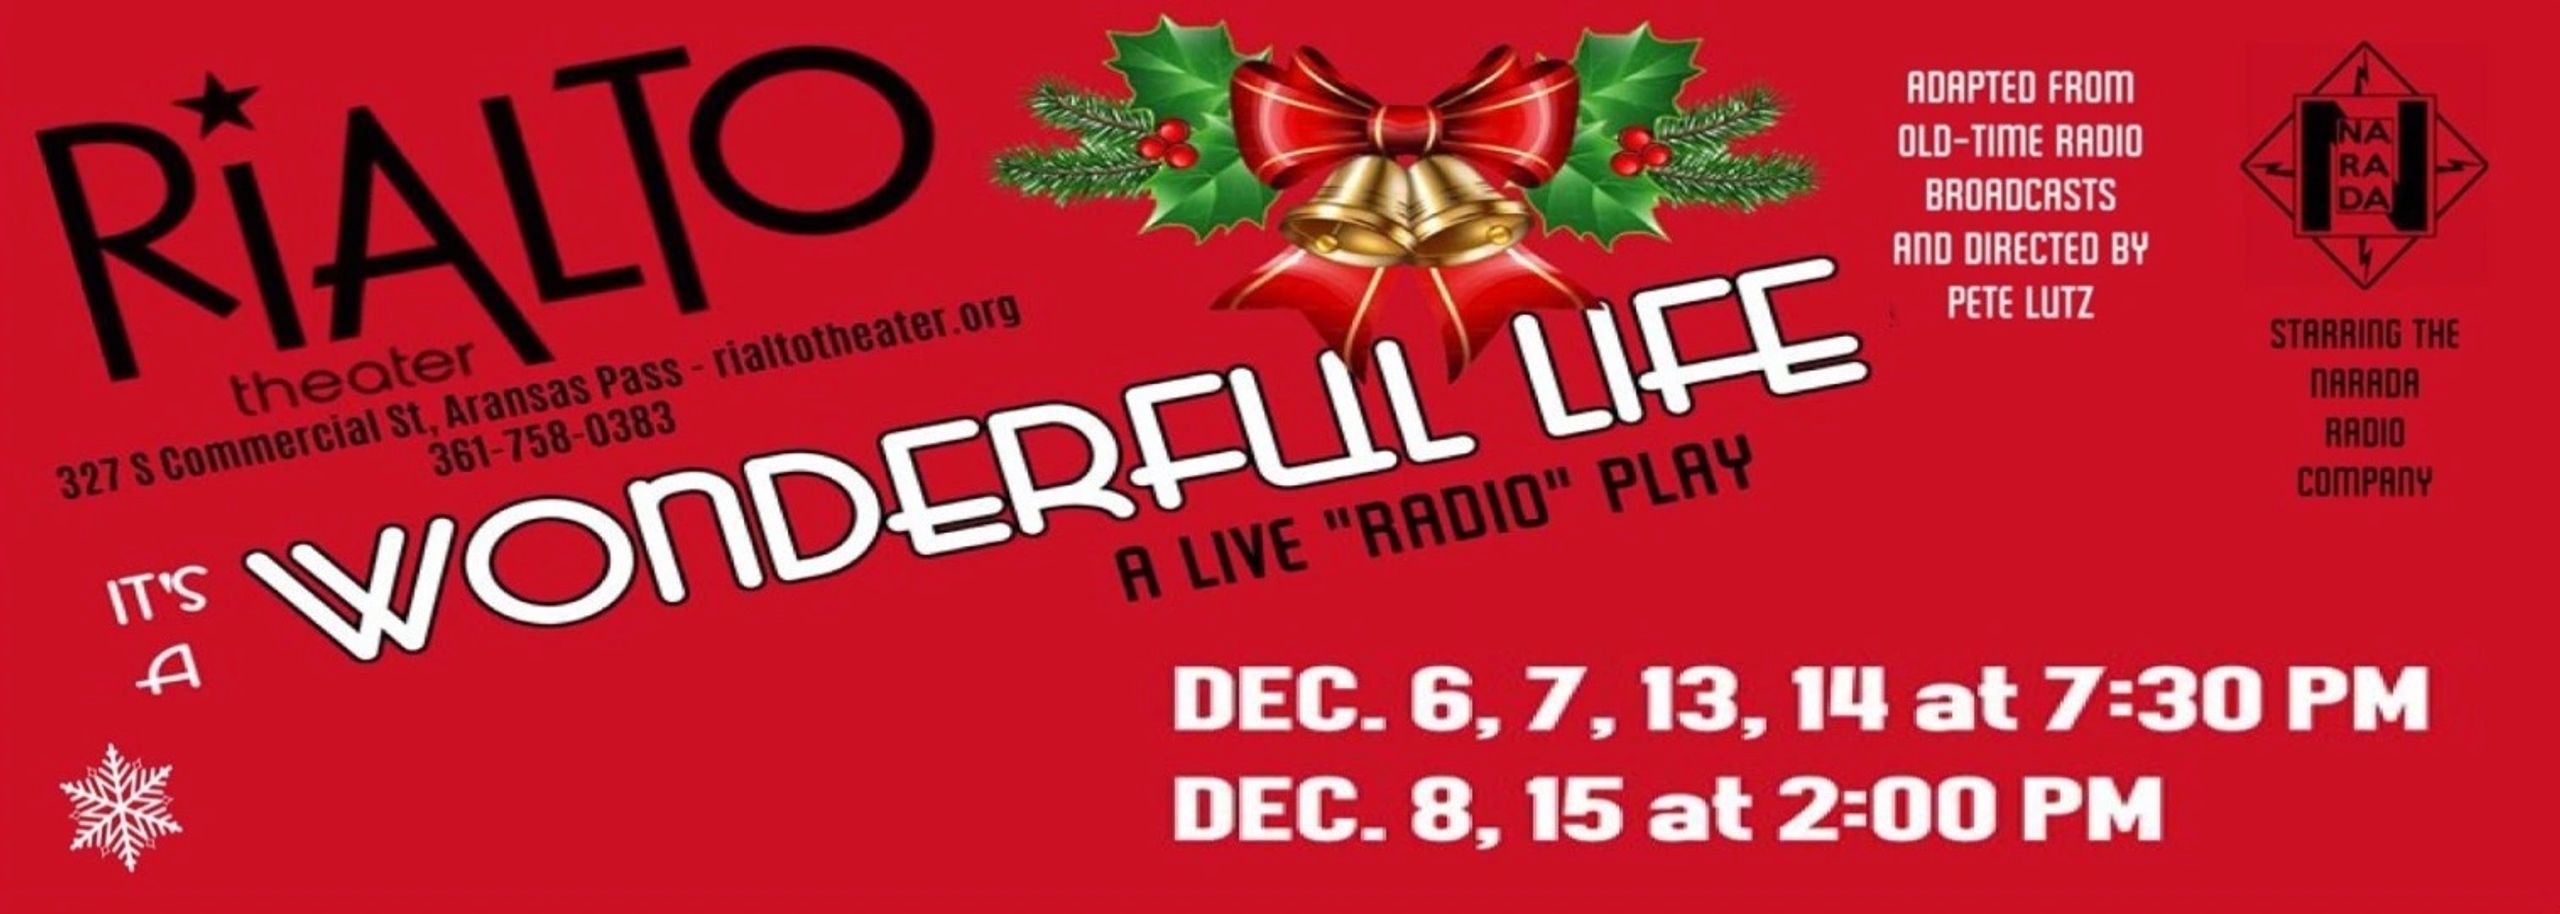 It's A Wonderful Life, a Live Radio Play by Rialto Theatre